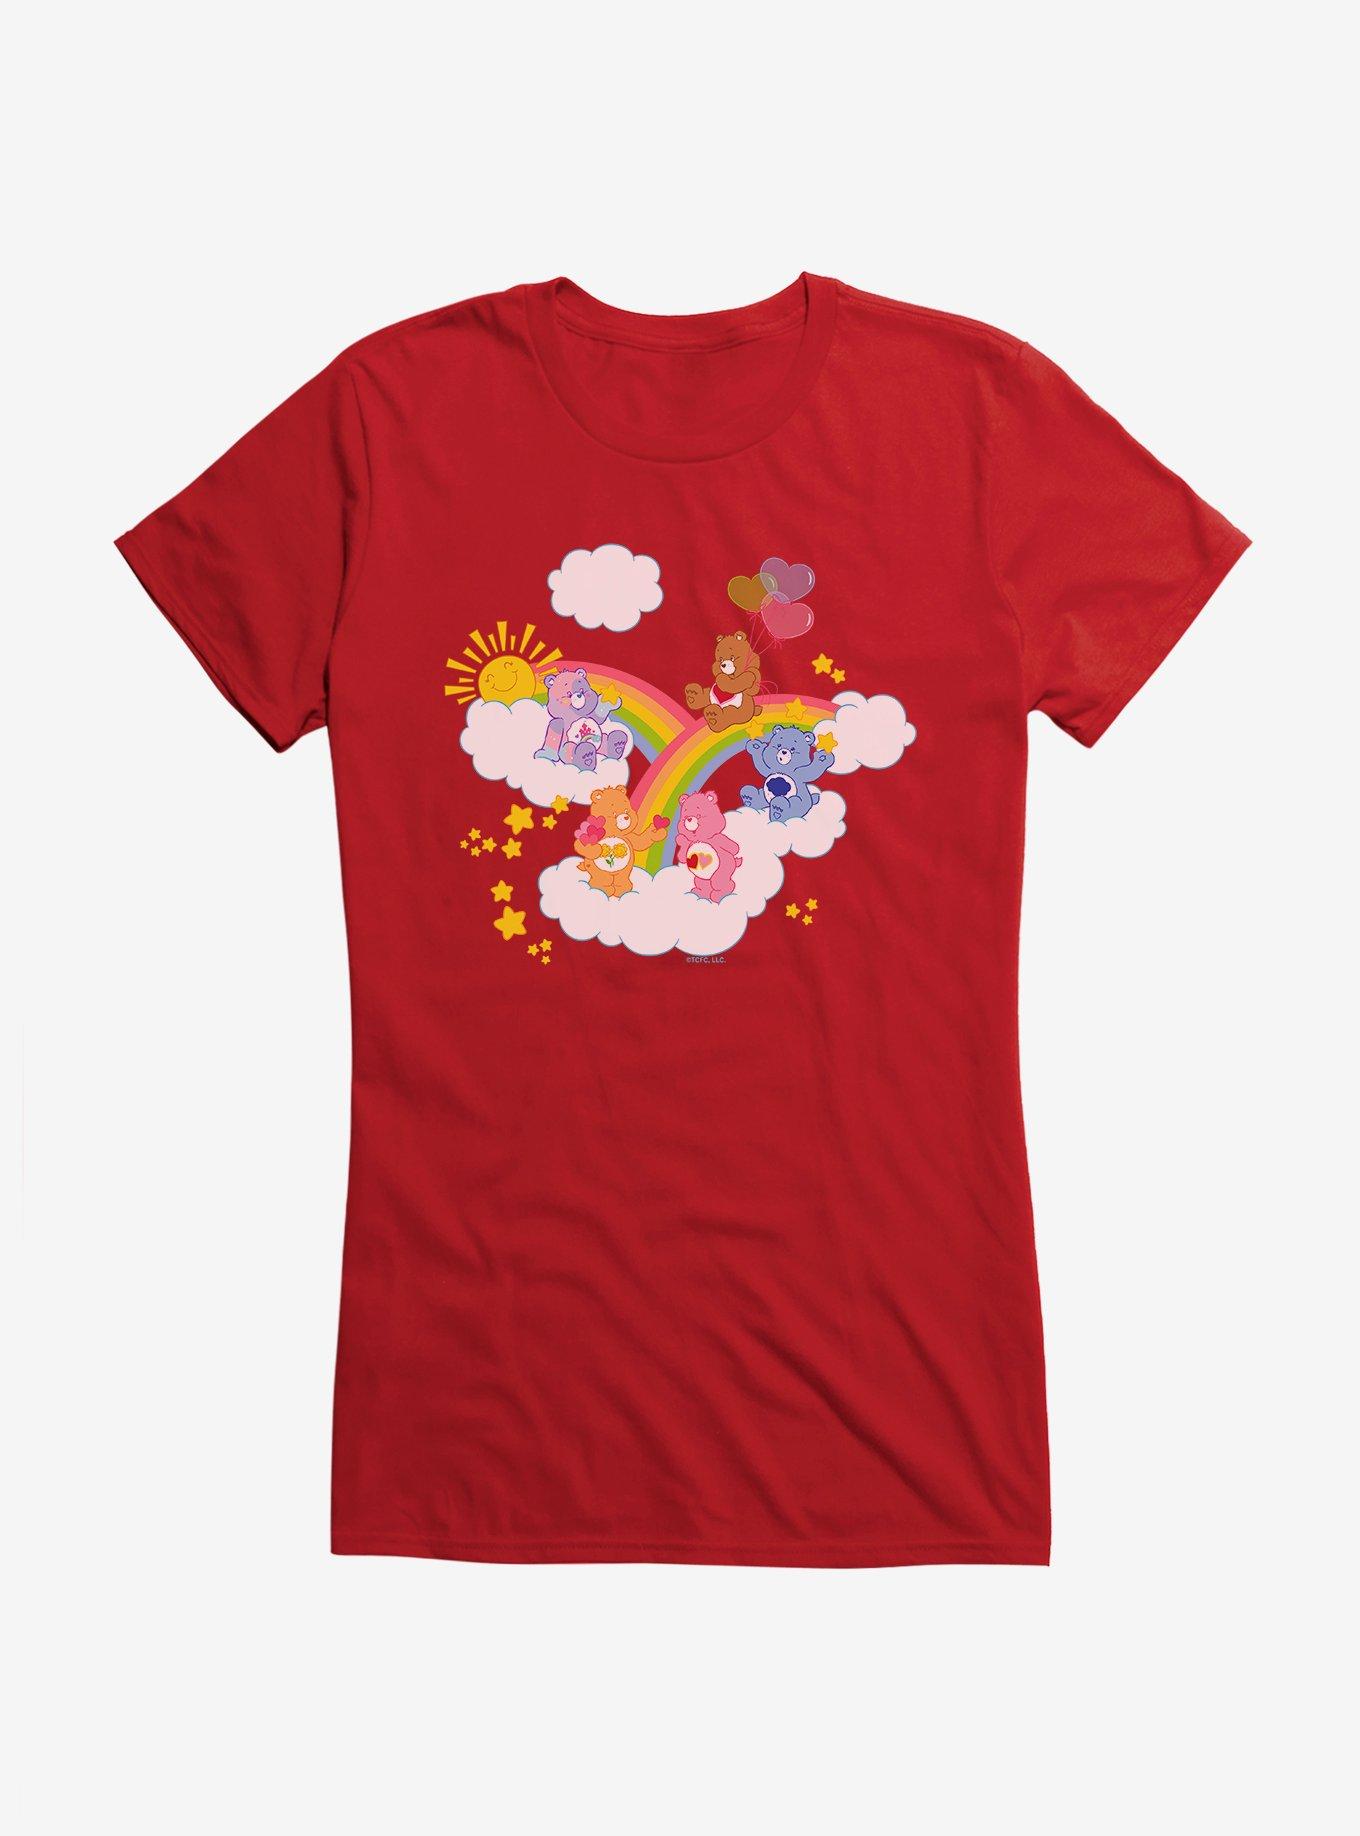 Care Bears Over The Rainbow Girls T-Shirt, RED, hi-res